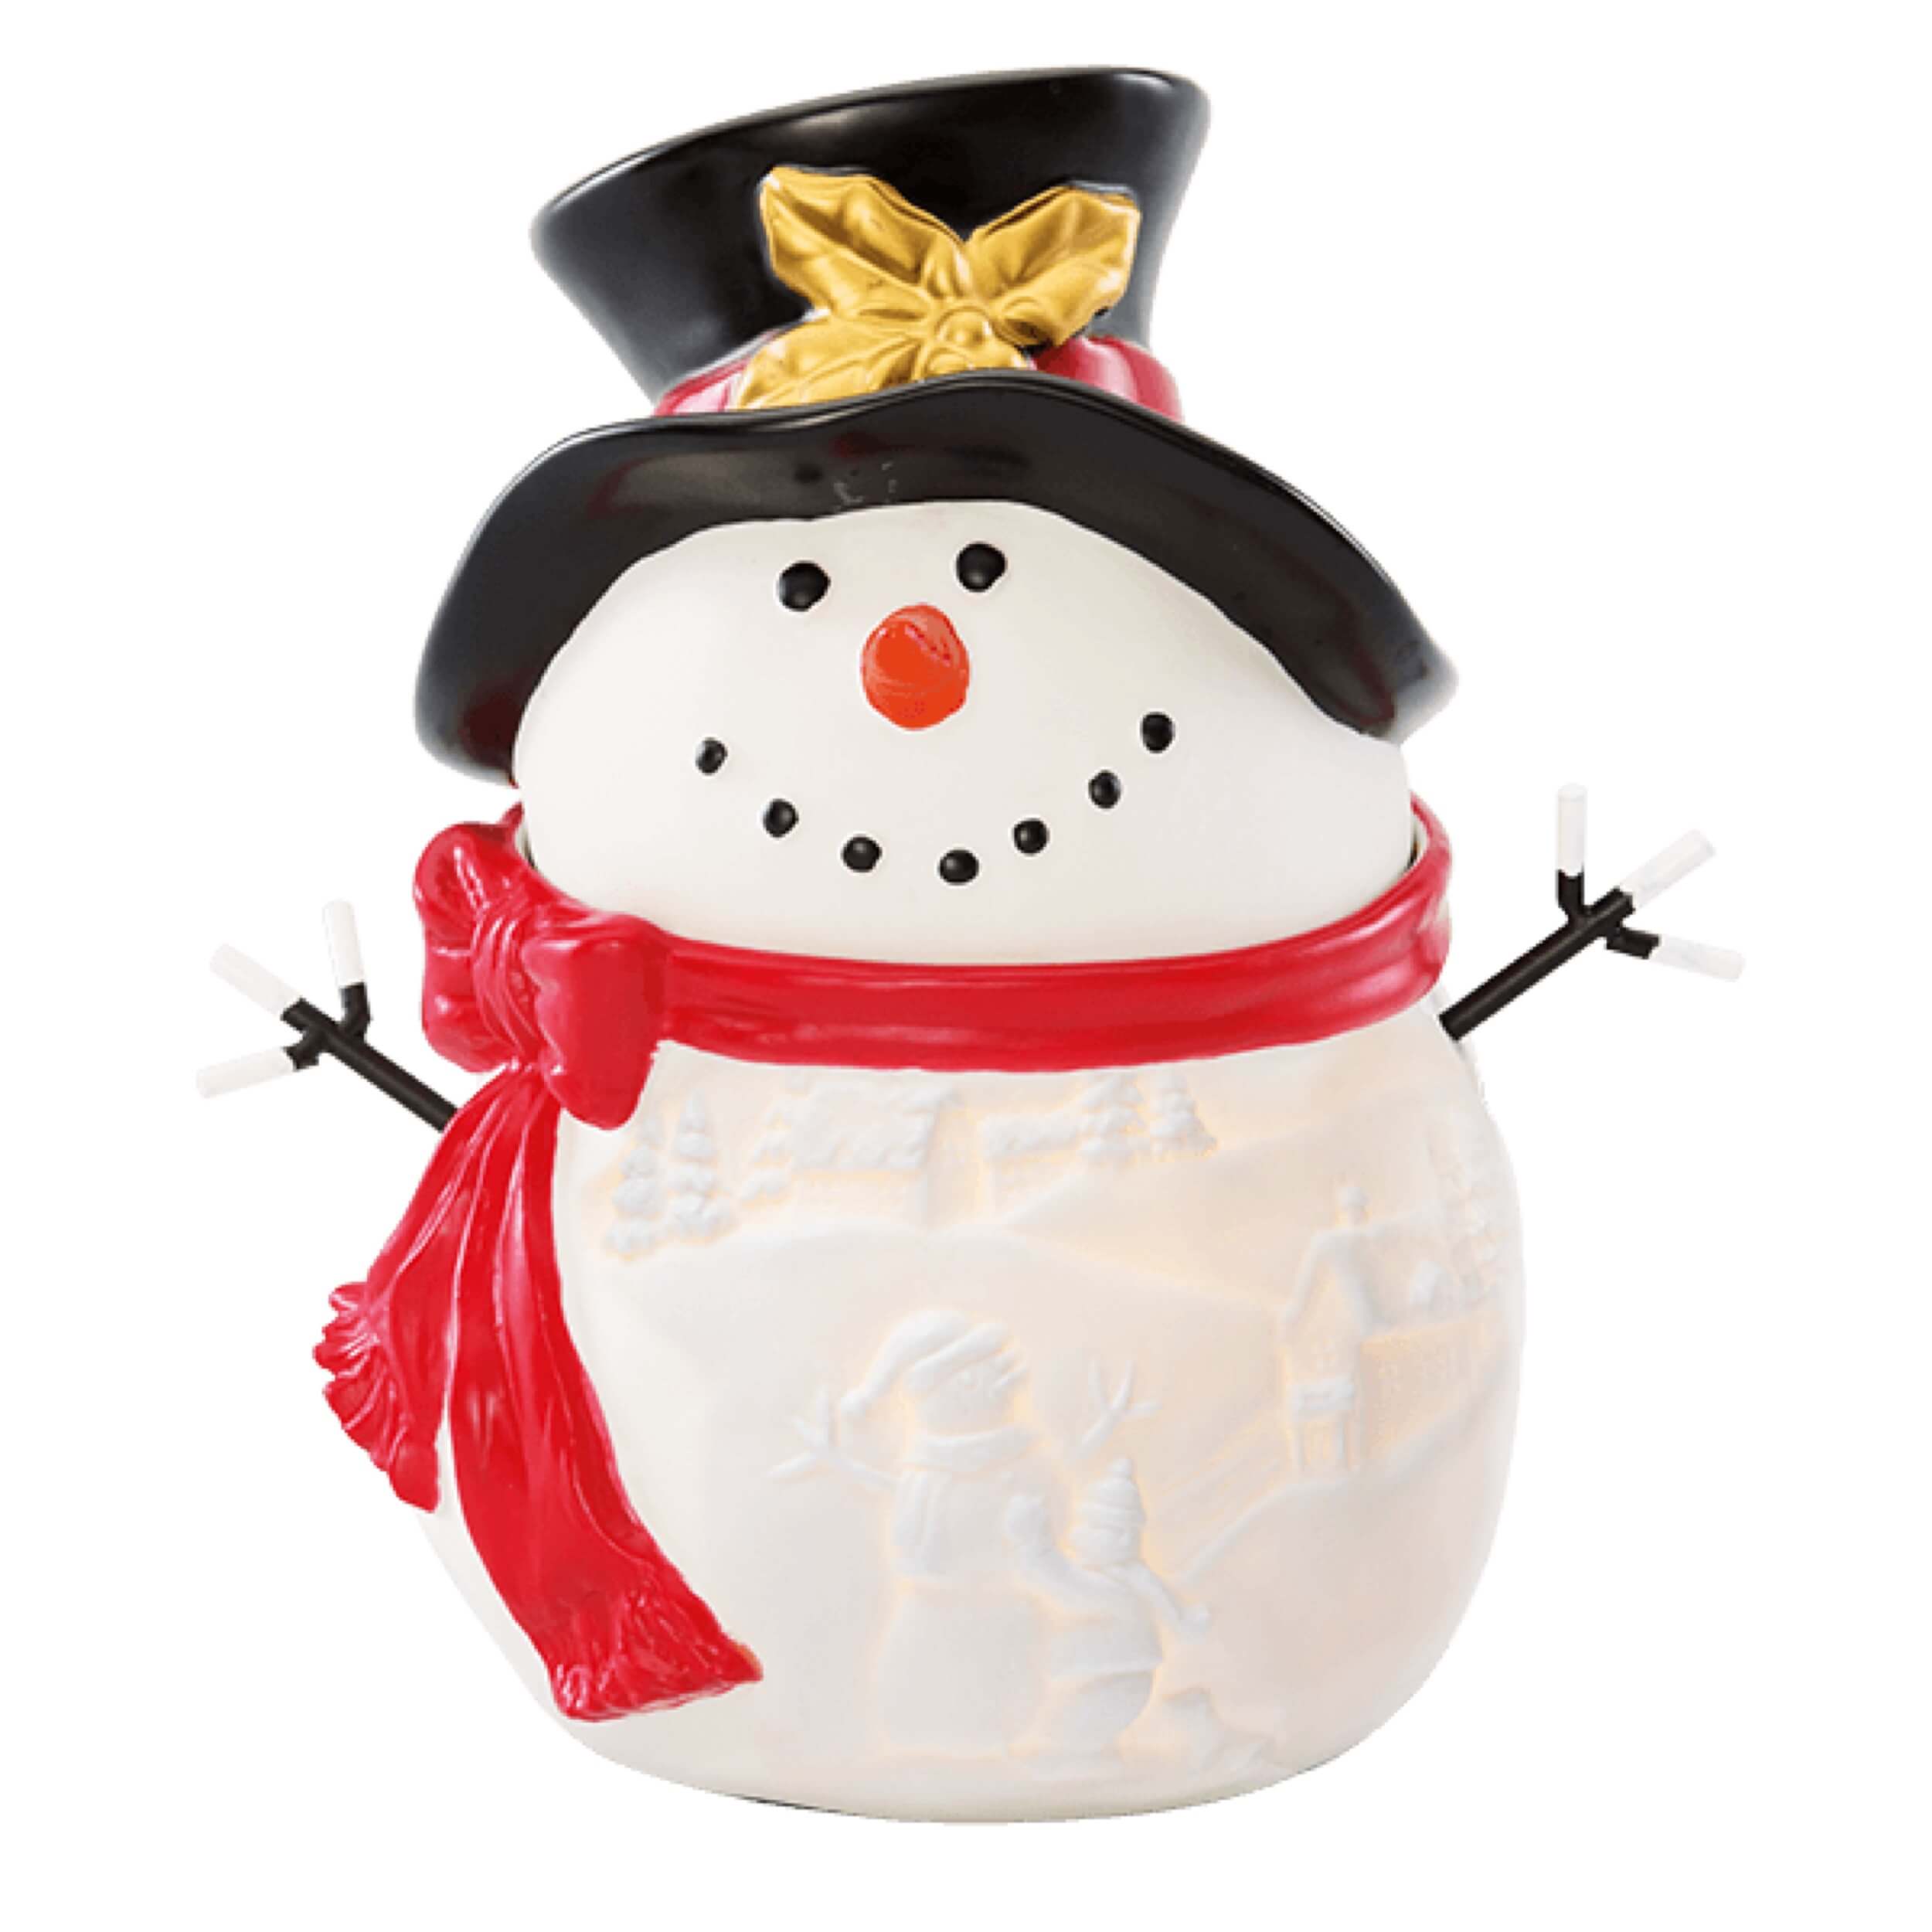 NEW! BUILD A SNOWMAN SCENTSY WARMER | Scentsy® Buy Online | Scentsy ...